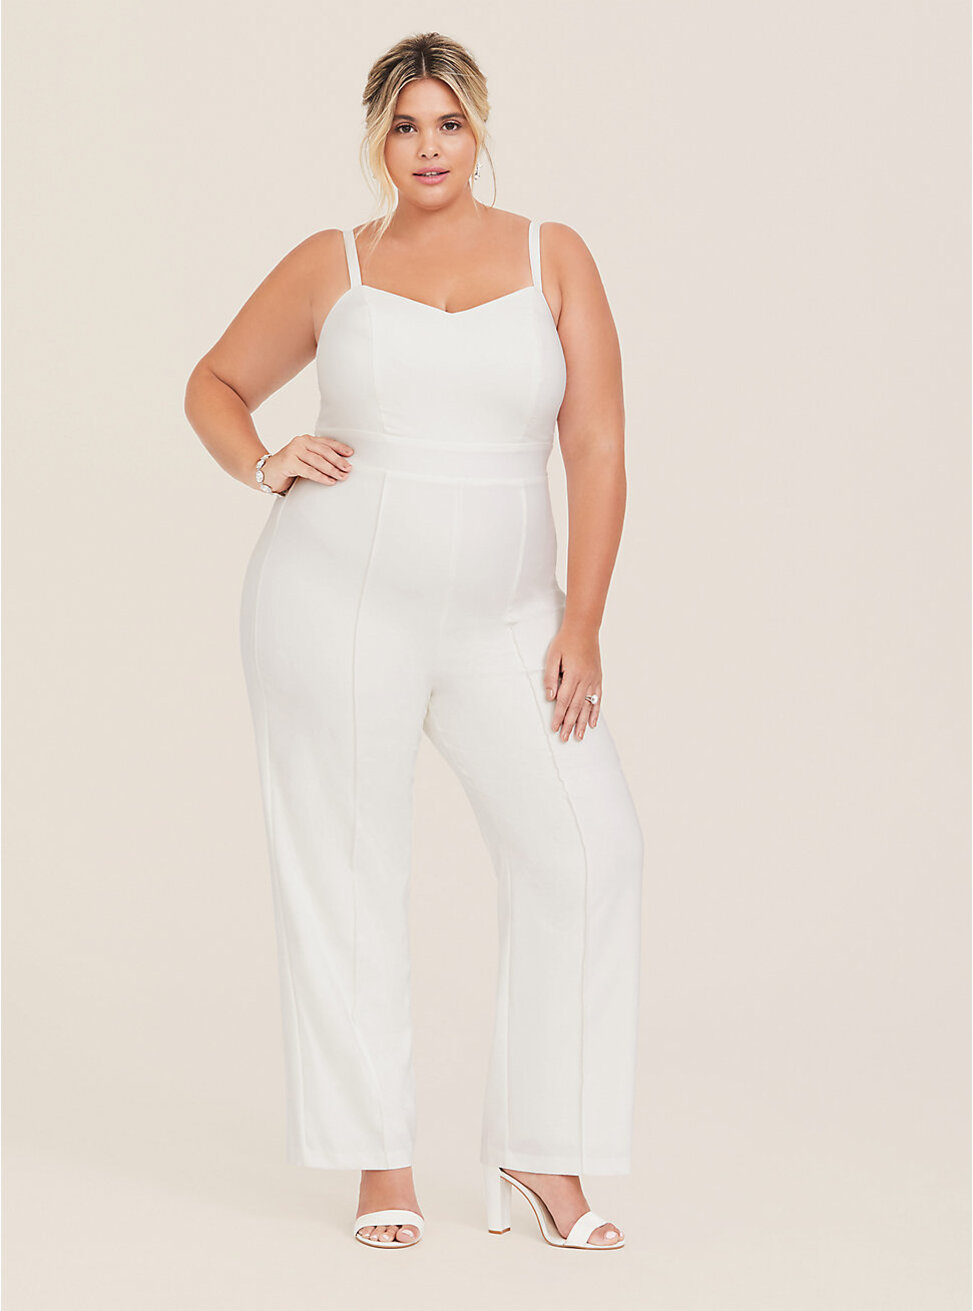 This flattering wedding jumpsuit lends an update to a classic special occasion look with front pintuck accents and cami straps.